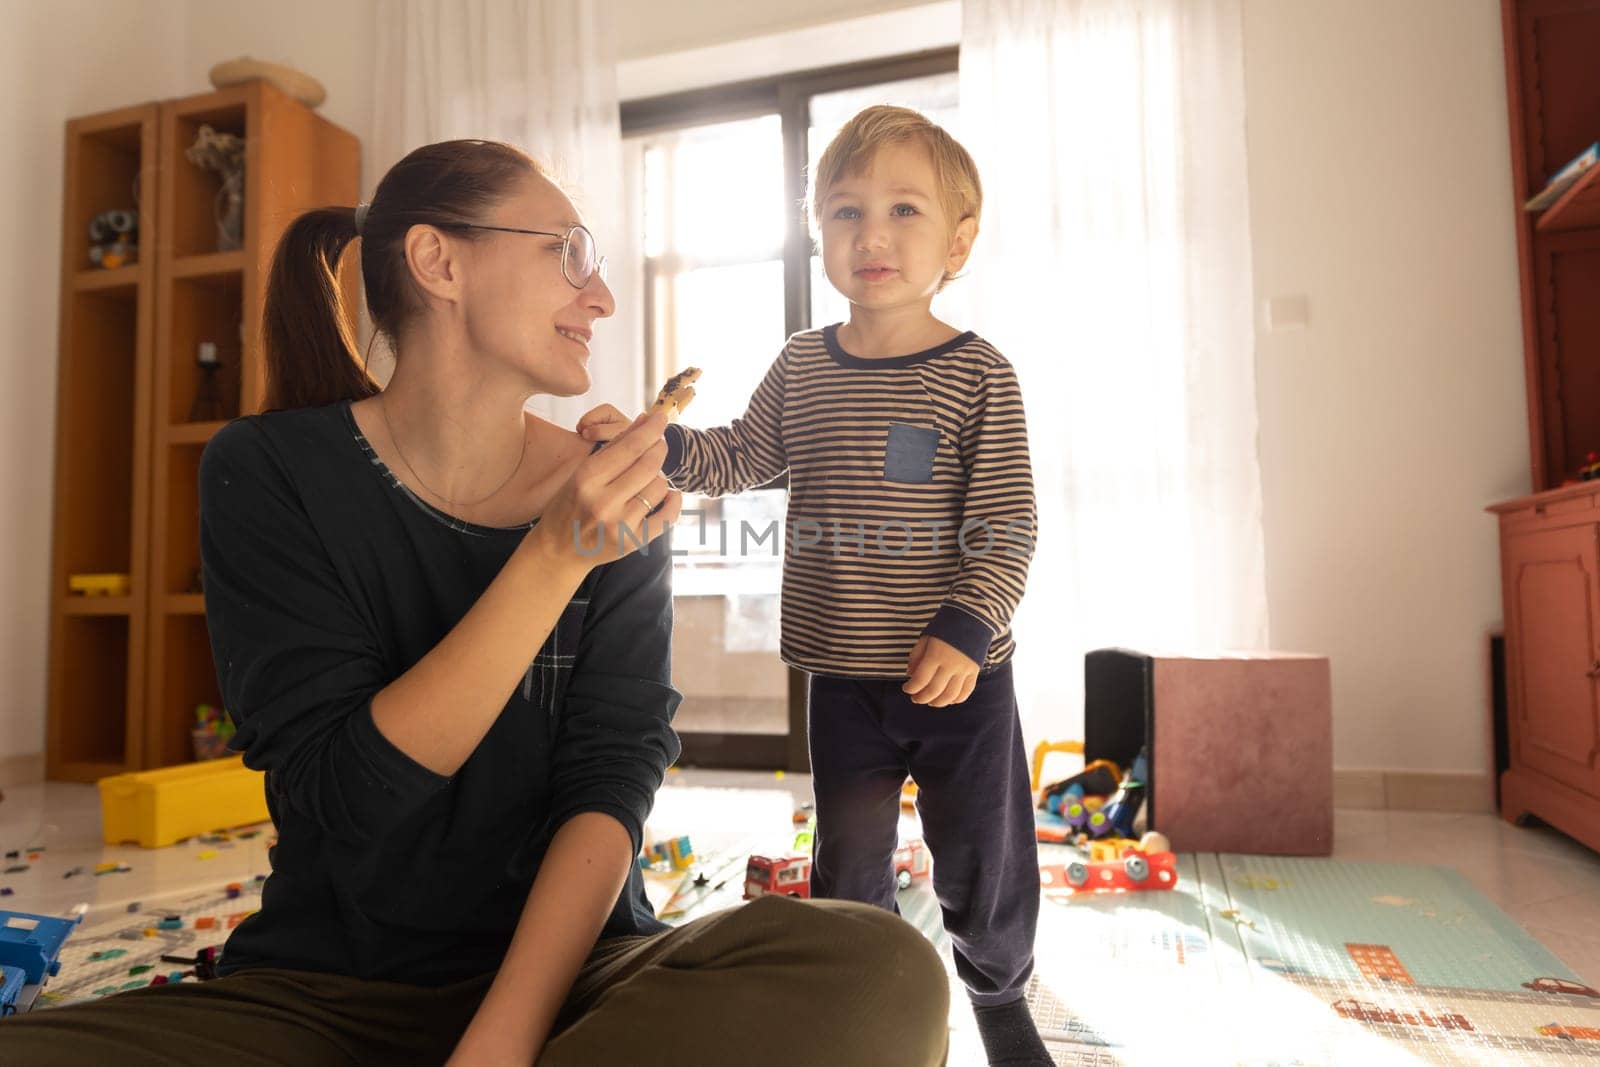 Mother and son in the playroom - a woman holds a cookie and a boy looks ahead by Studia72